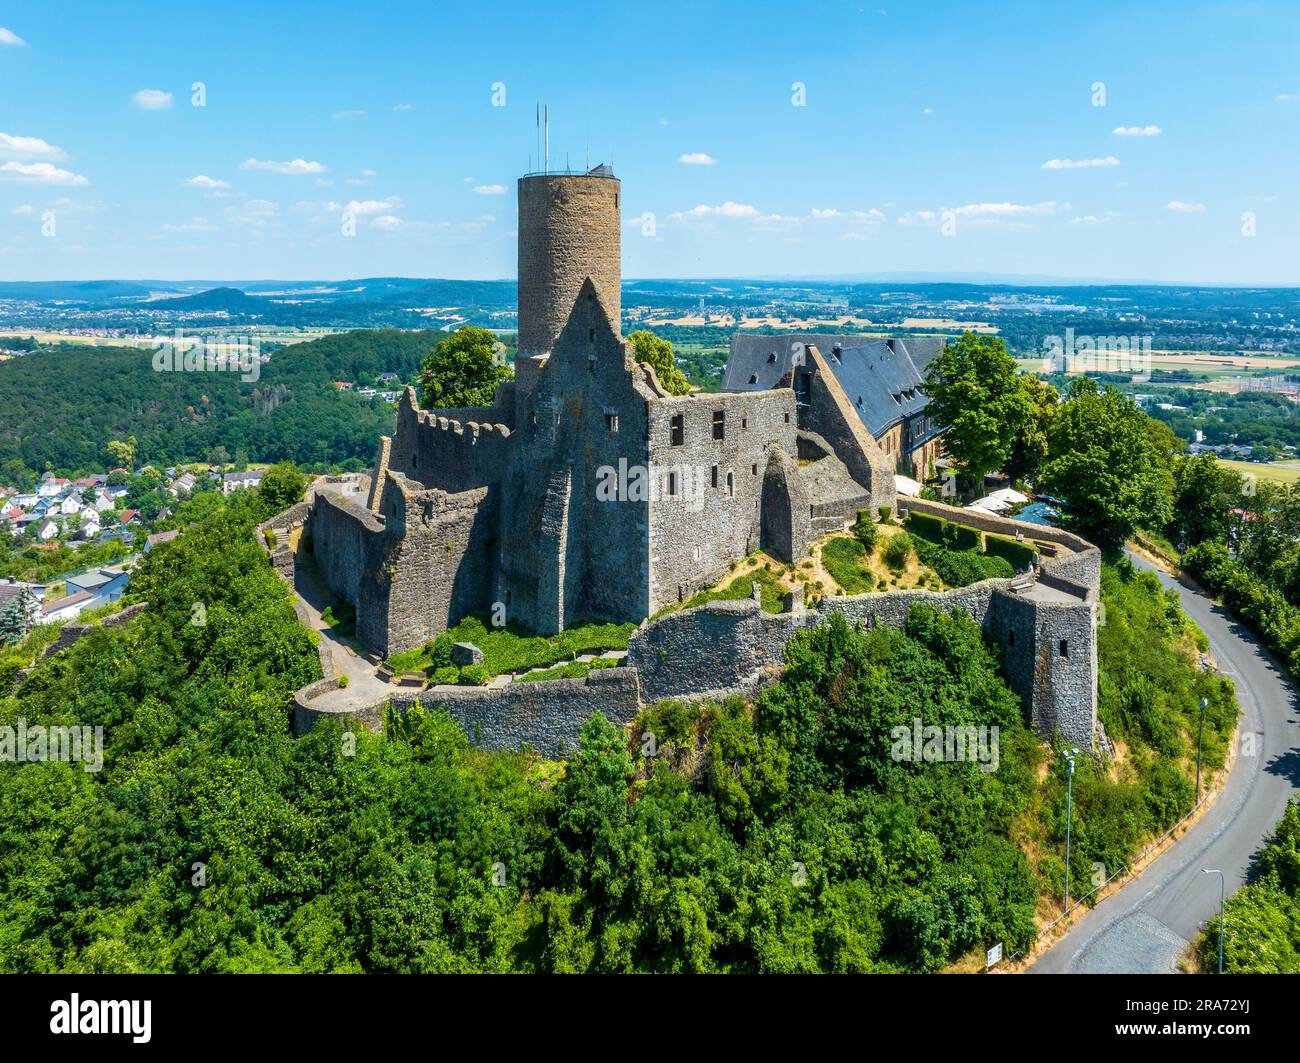 Ruins of medieval Gleiberg castle in Hesse, Germany, located on the top of a volcanic mountain. Aerial view in summer Stock Photo